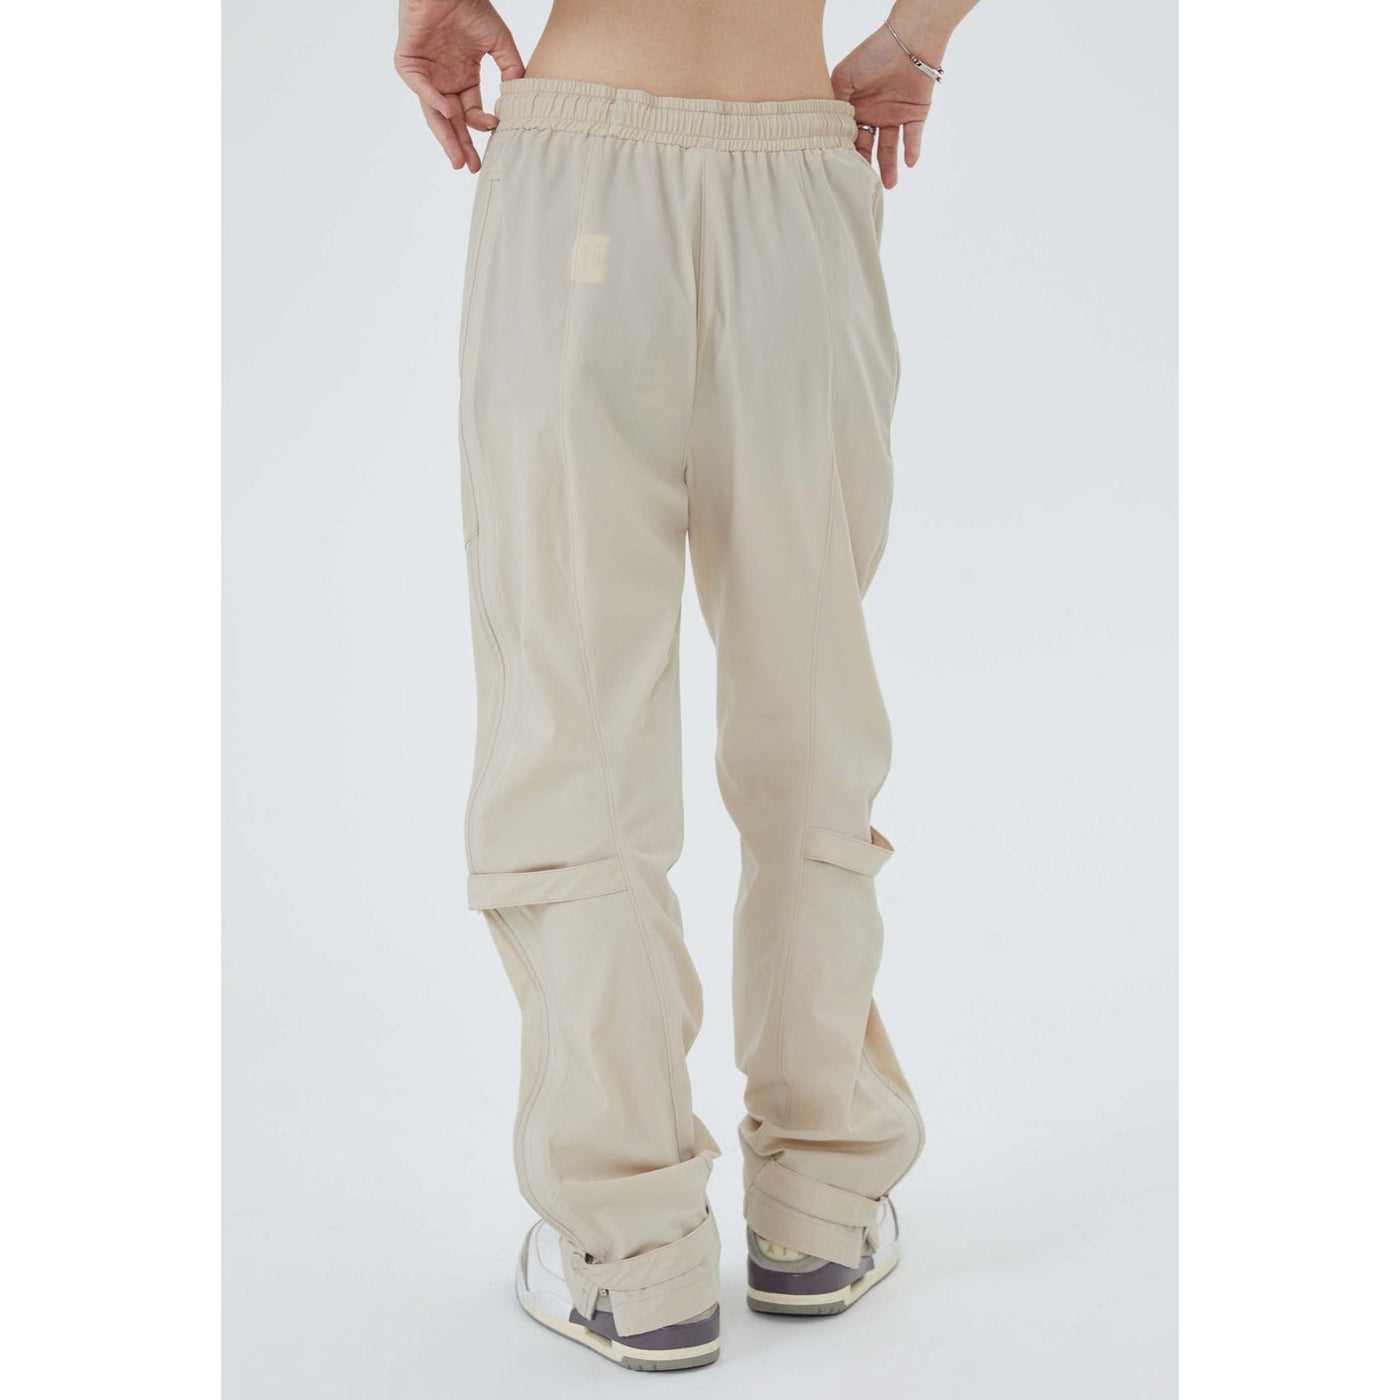 Relaxed Fit Drawstring Pants Korean Street Fashion Pants By Made Extreme Shop Online at OH Vault